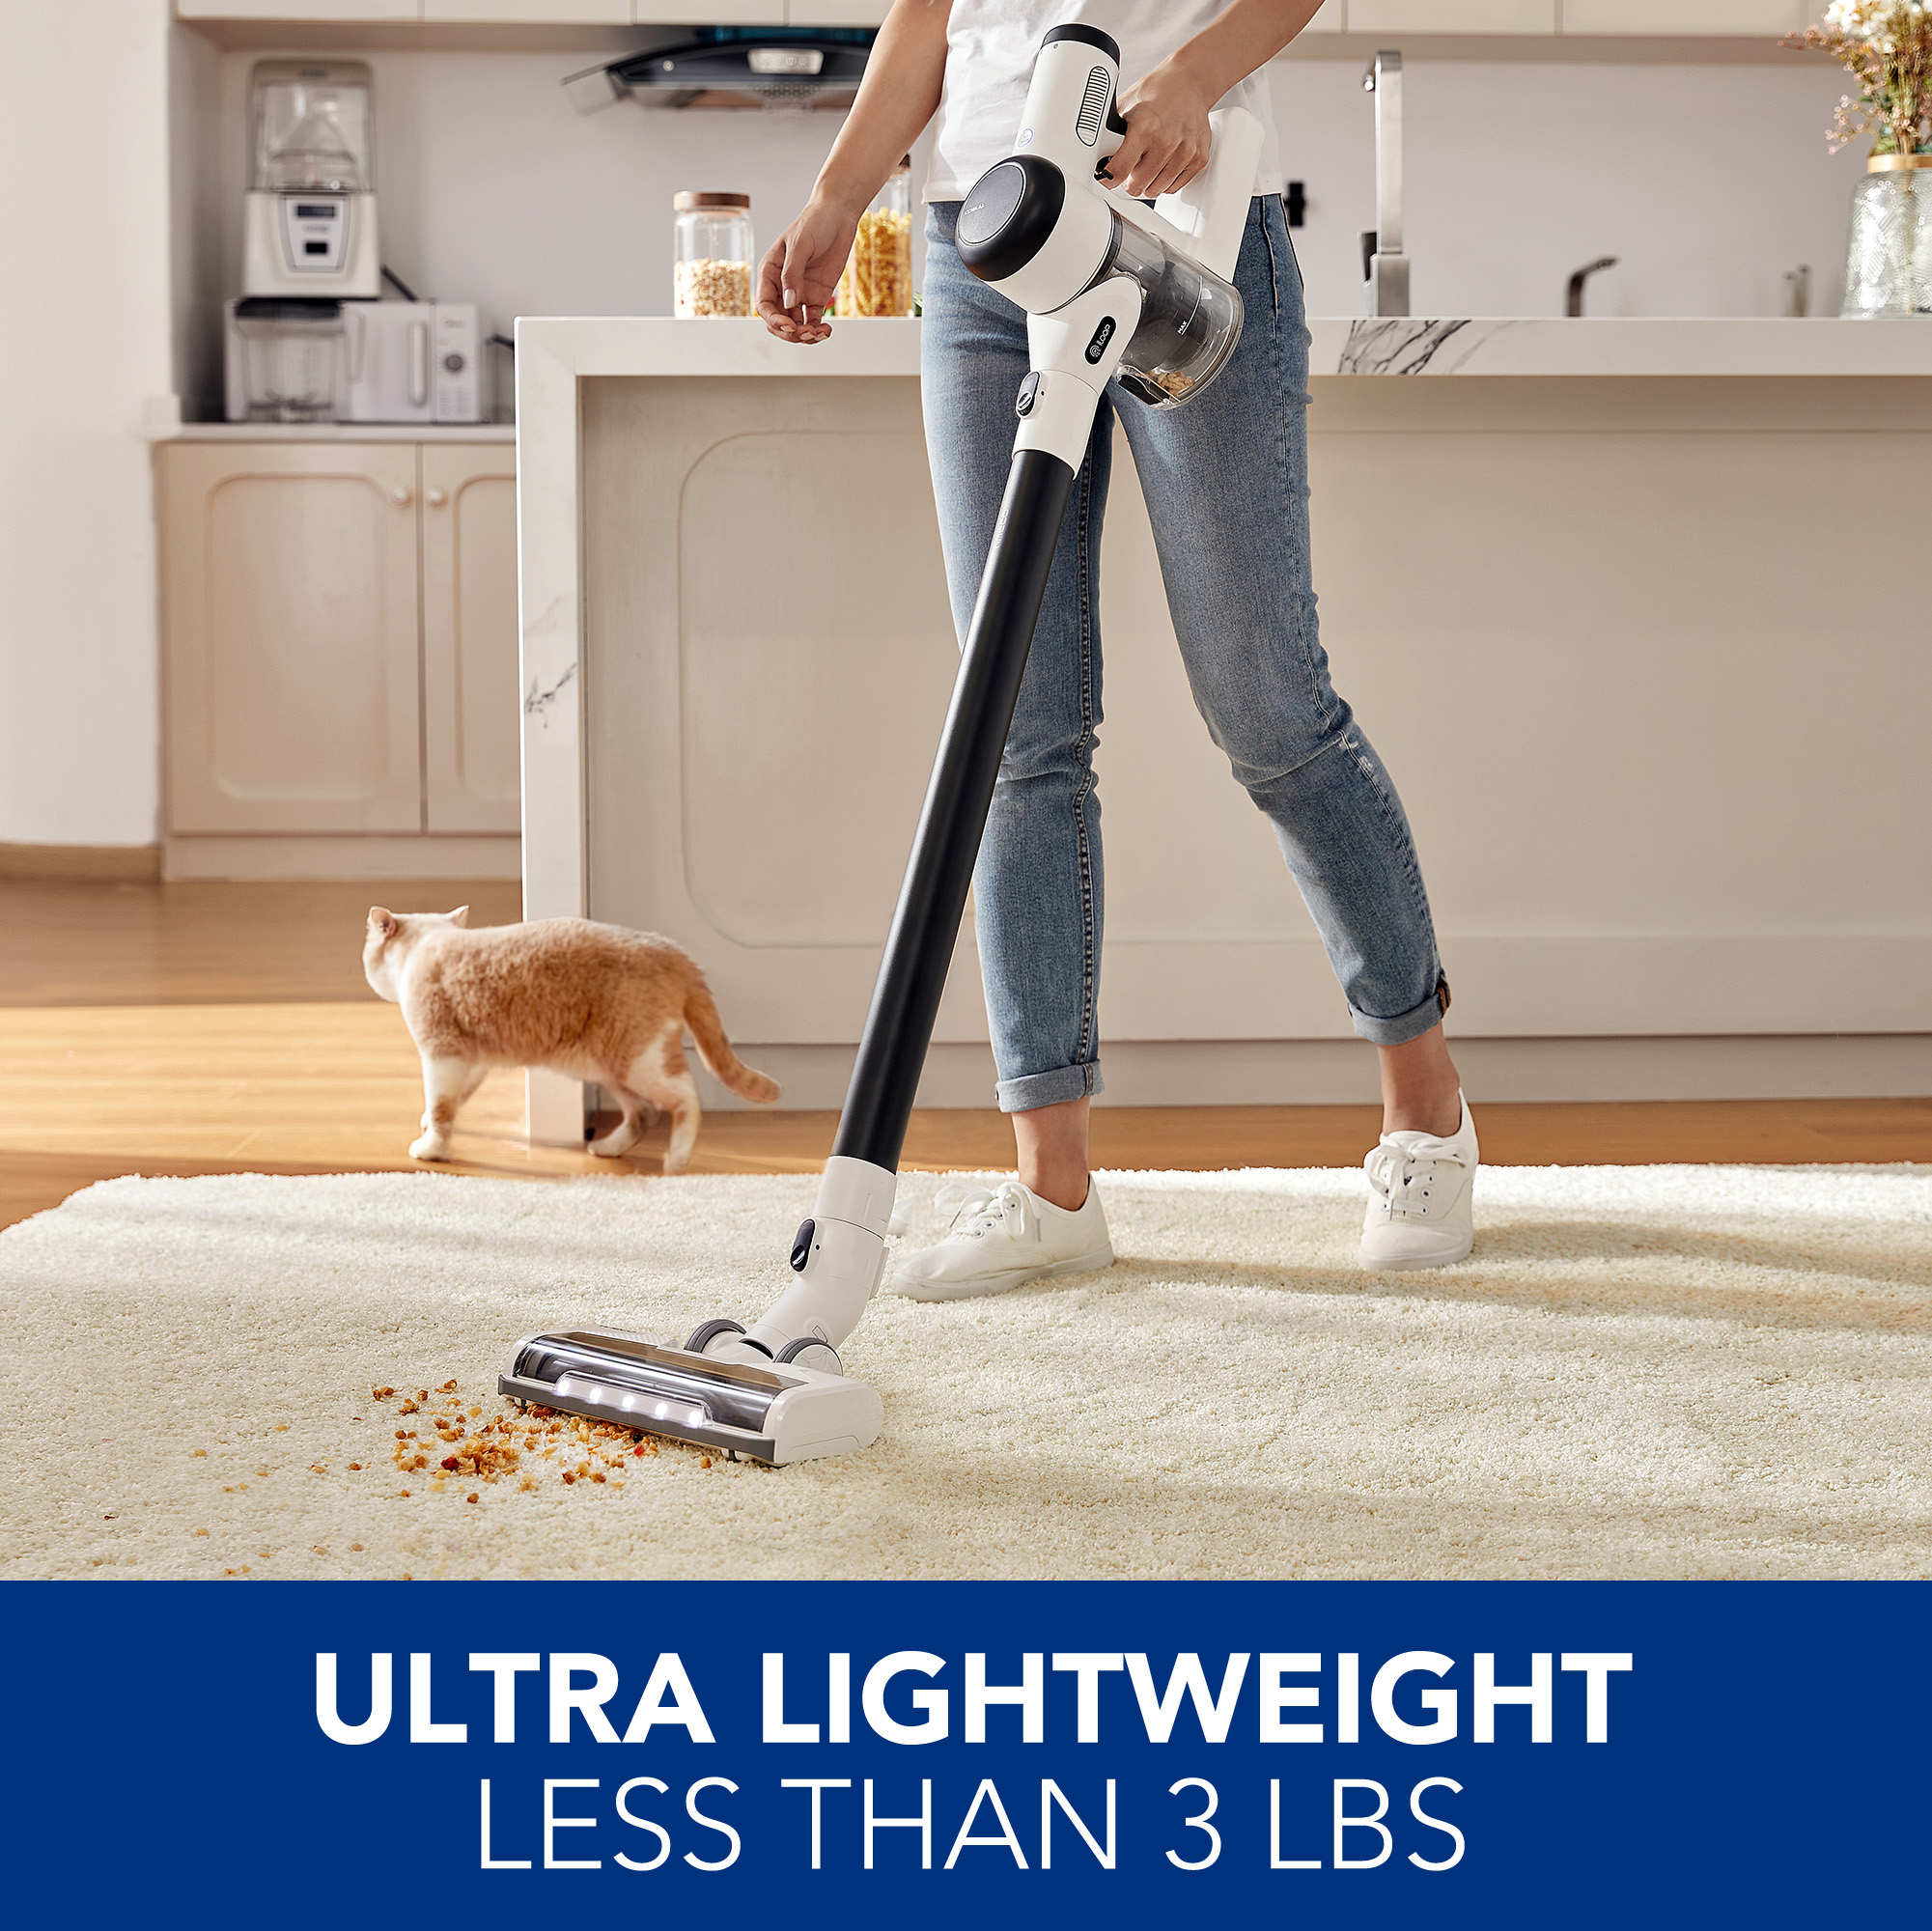 Tineco Pure One X Smart Lightweight Cordless Stick Vacuum Cleaner with Extra-Long Runtime - image 5 of 10